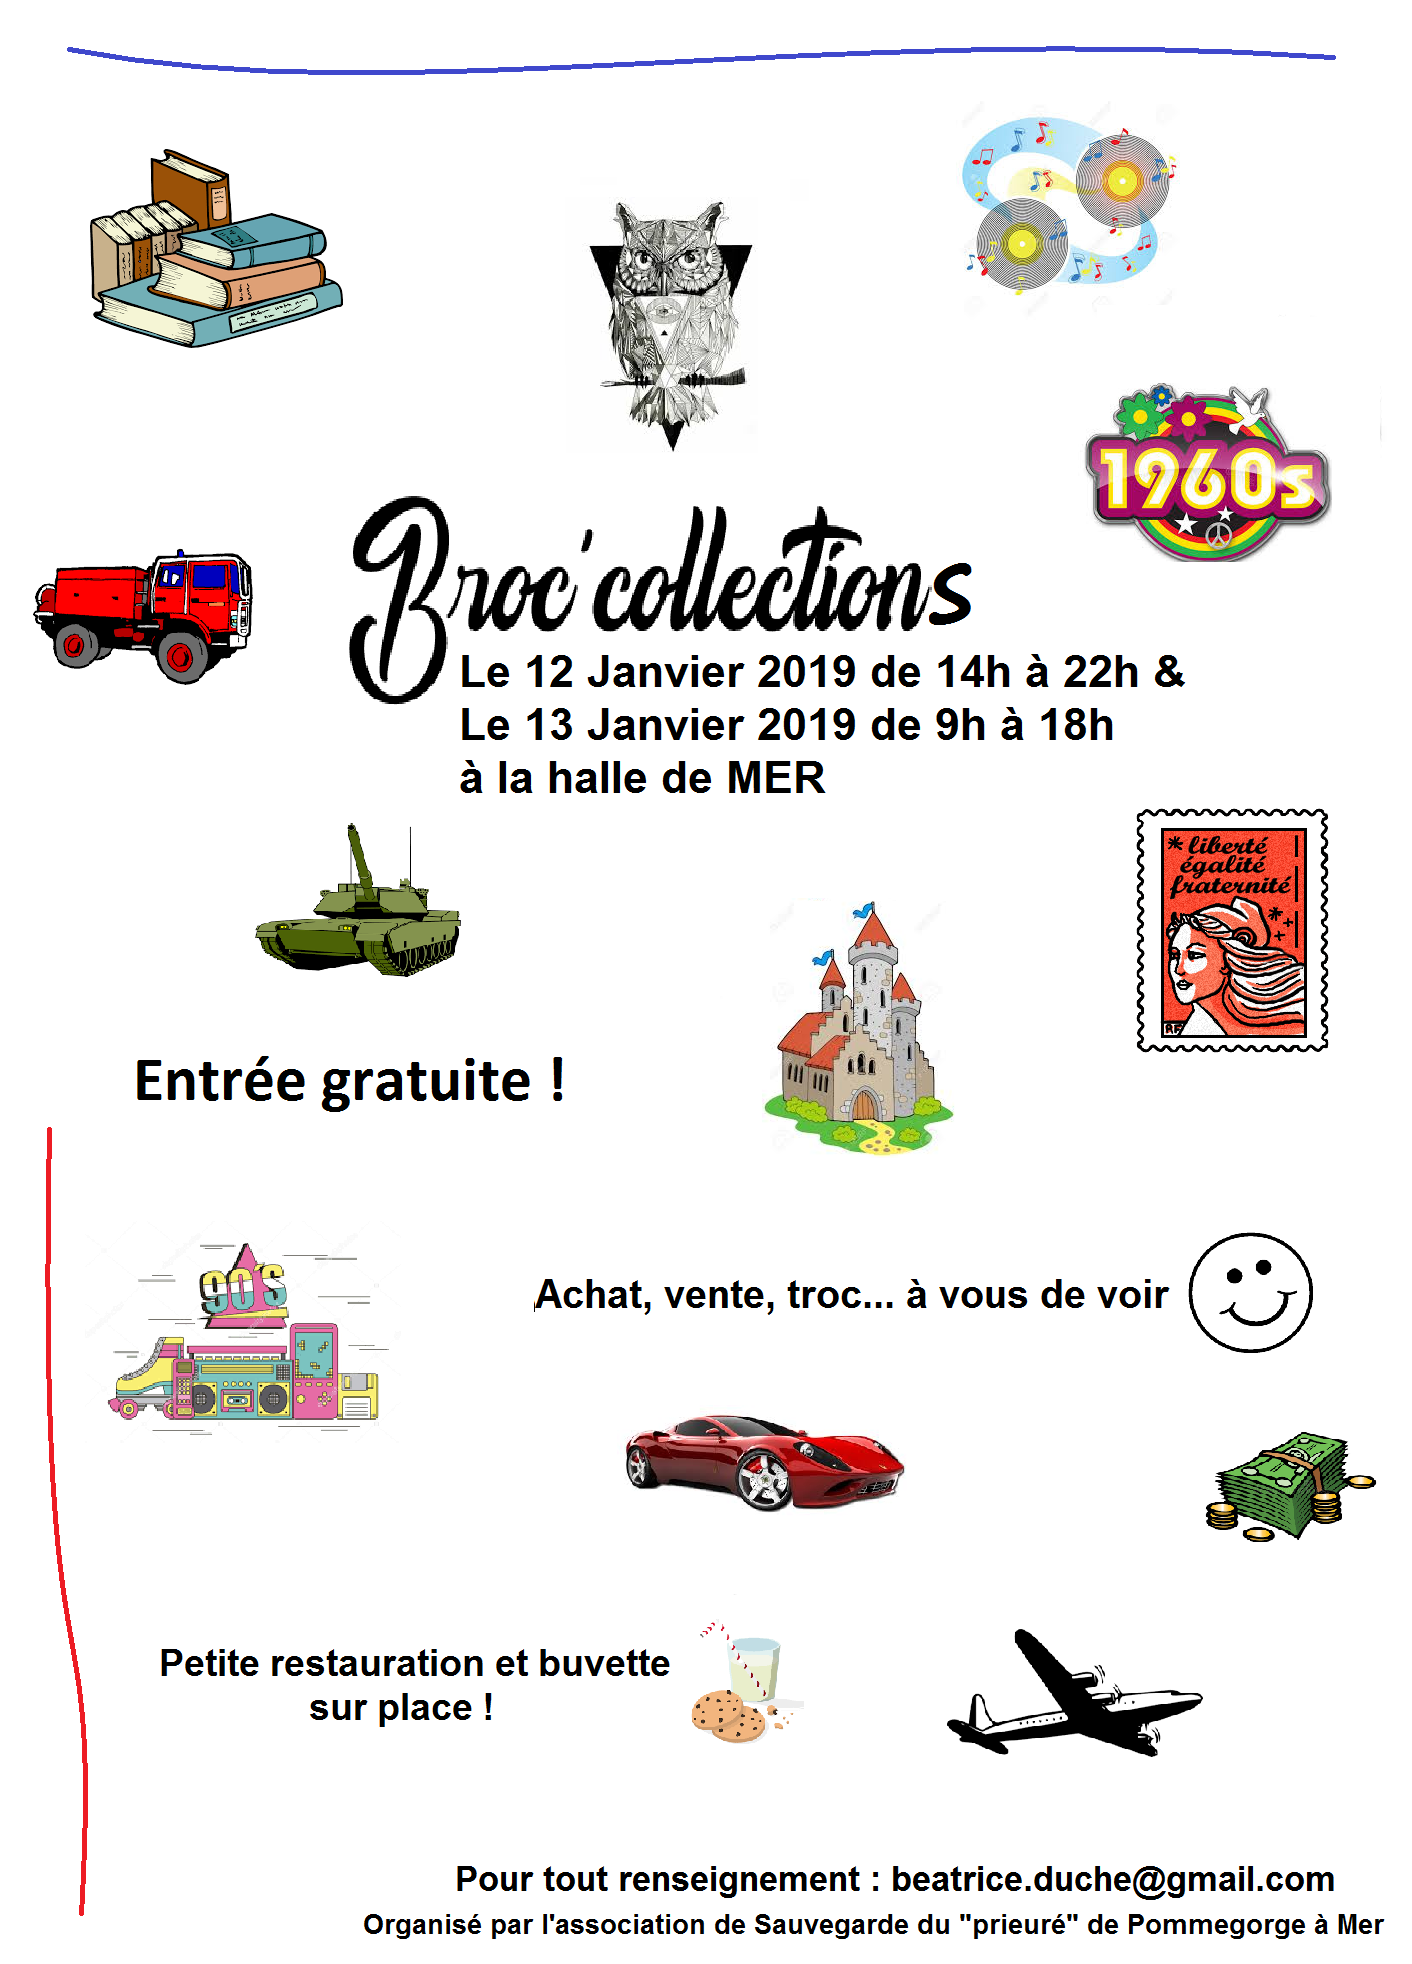 Broccollections affiche 2019